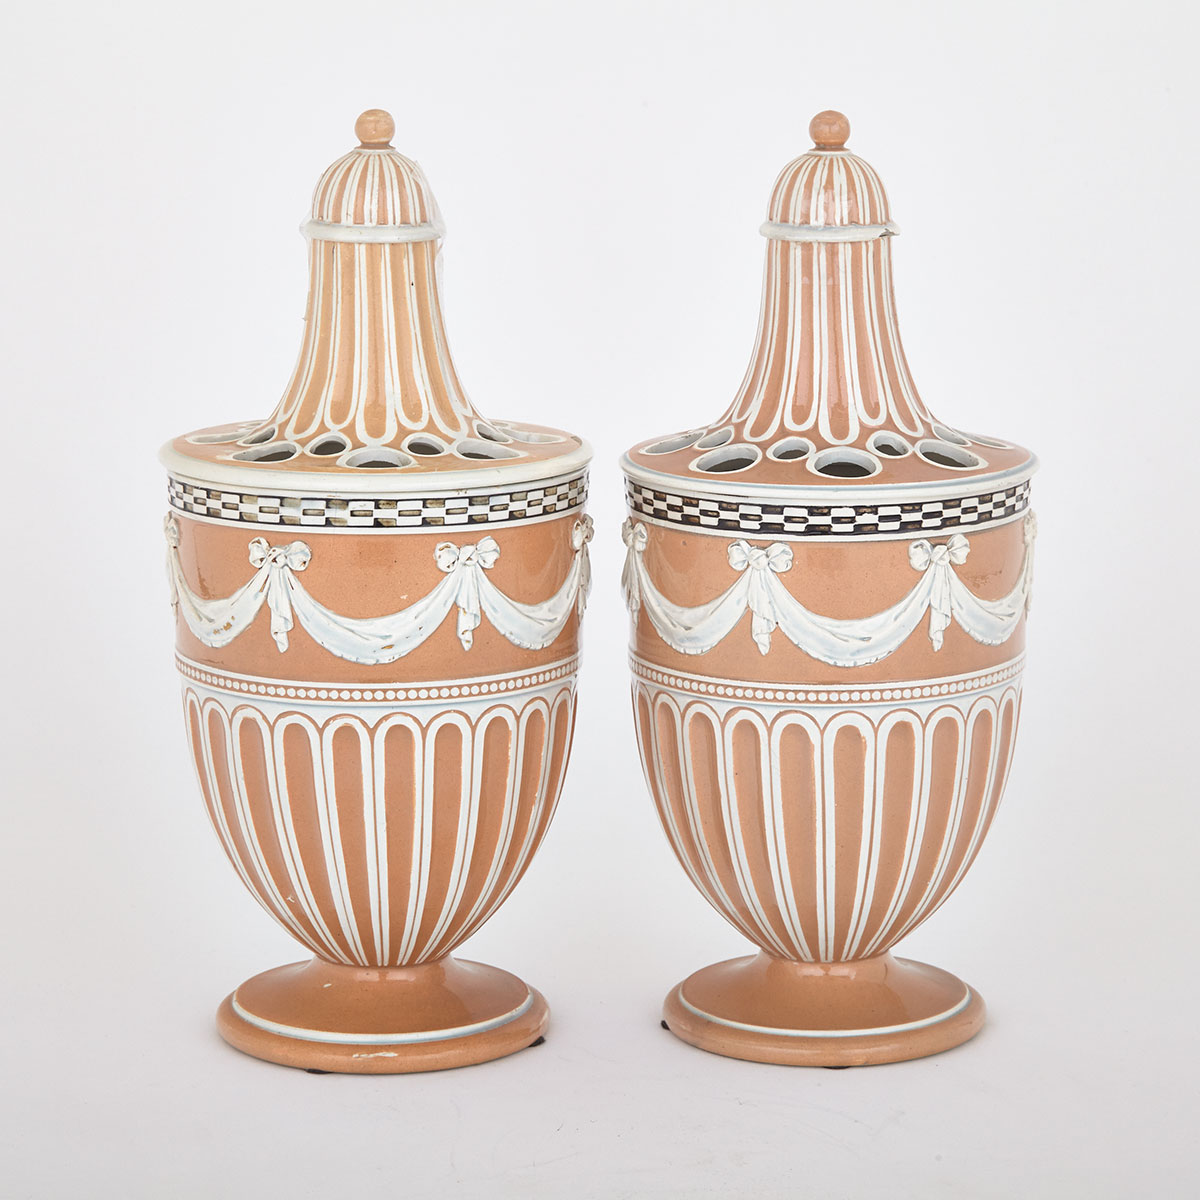 Pair of Wedgwood Slip Decorated Pearlware Bough Pots, c.1790